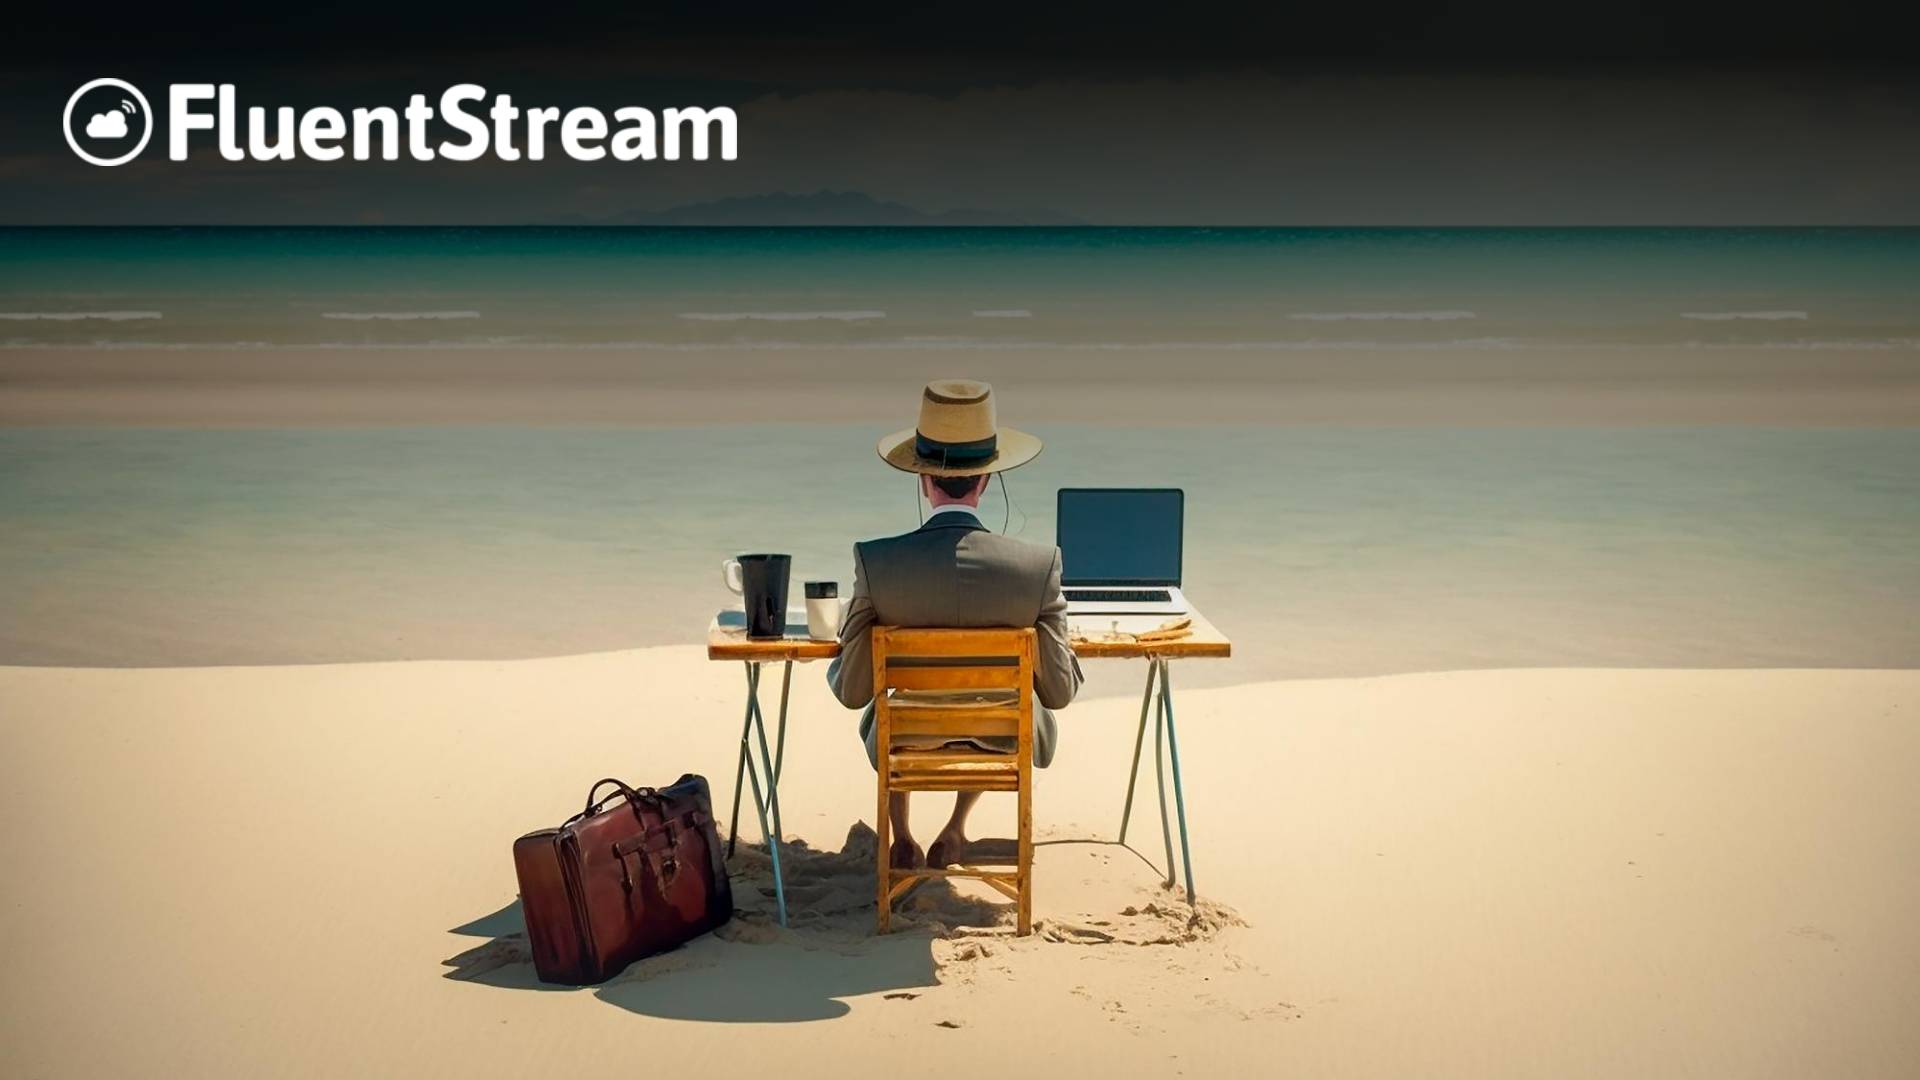 FluentStream's UCaaS Solutions Prove Vital for Hybrid and Remote Work as Shift to Long-Term Remote Work Continues